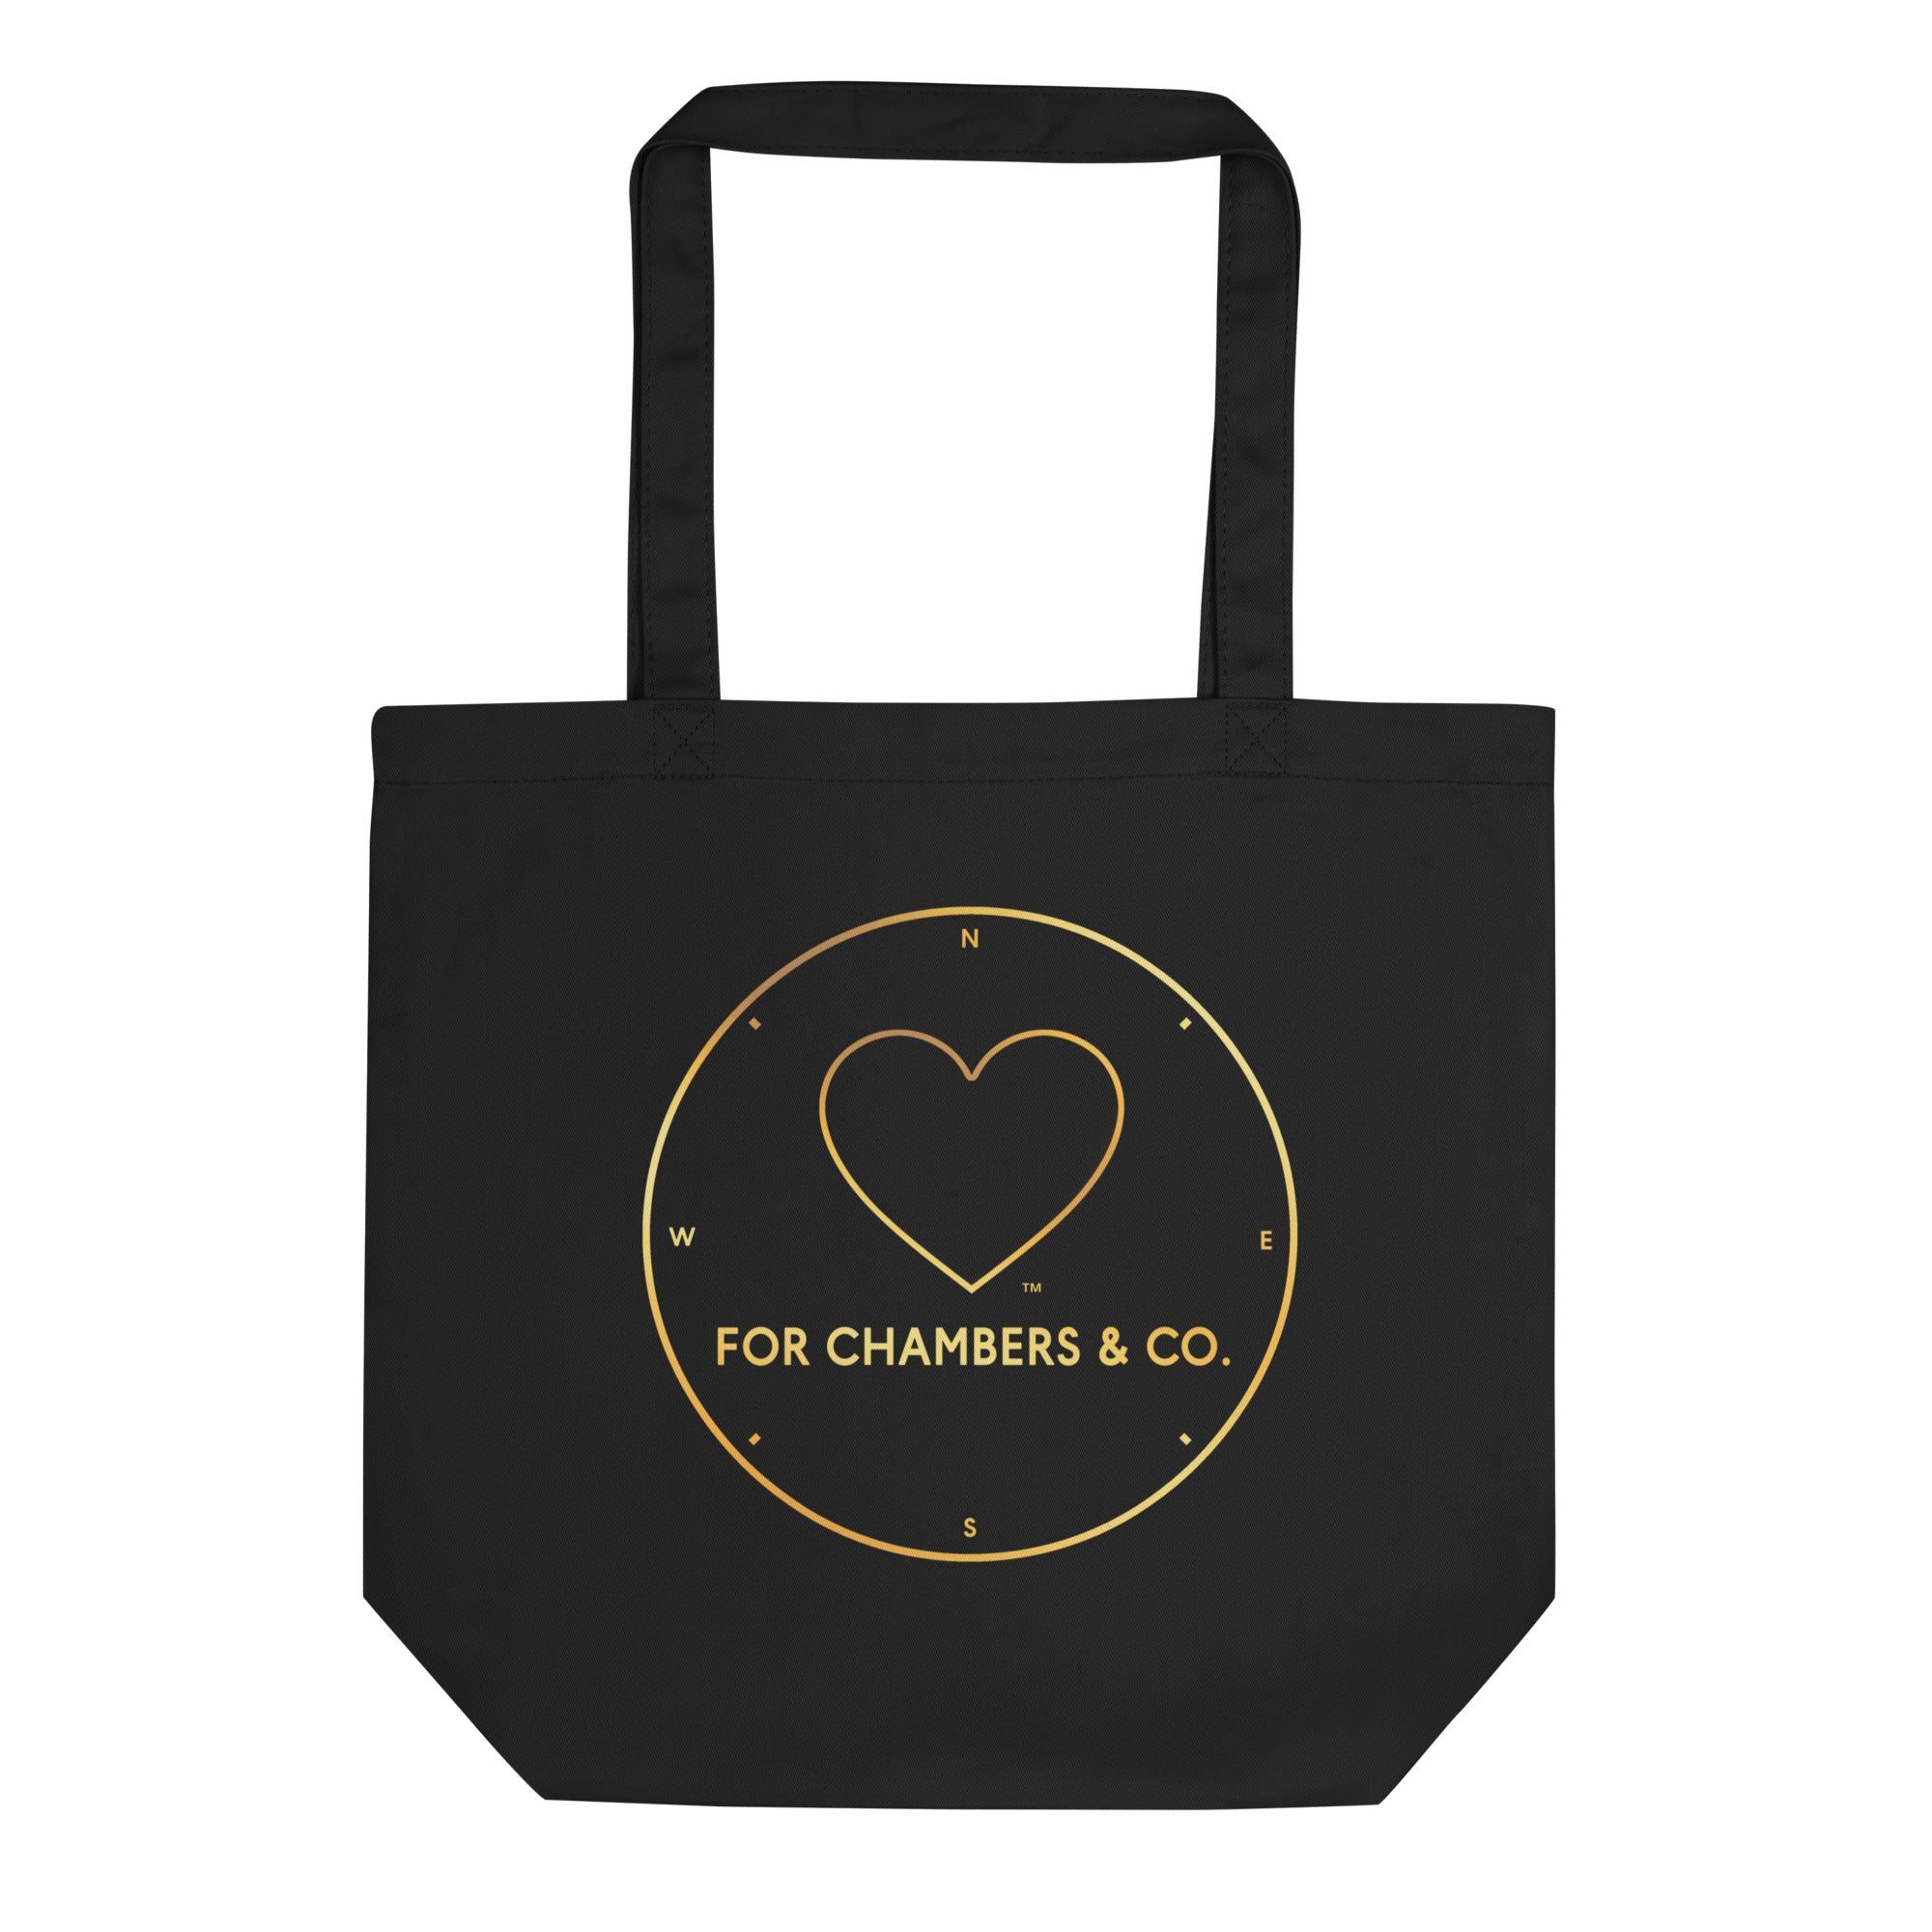 FOR CHAMBERS & CO. LOGO Eco Tote Bag in Black